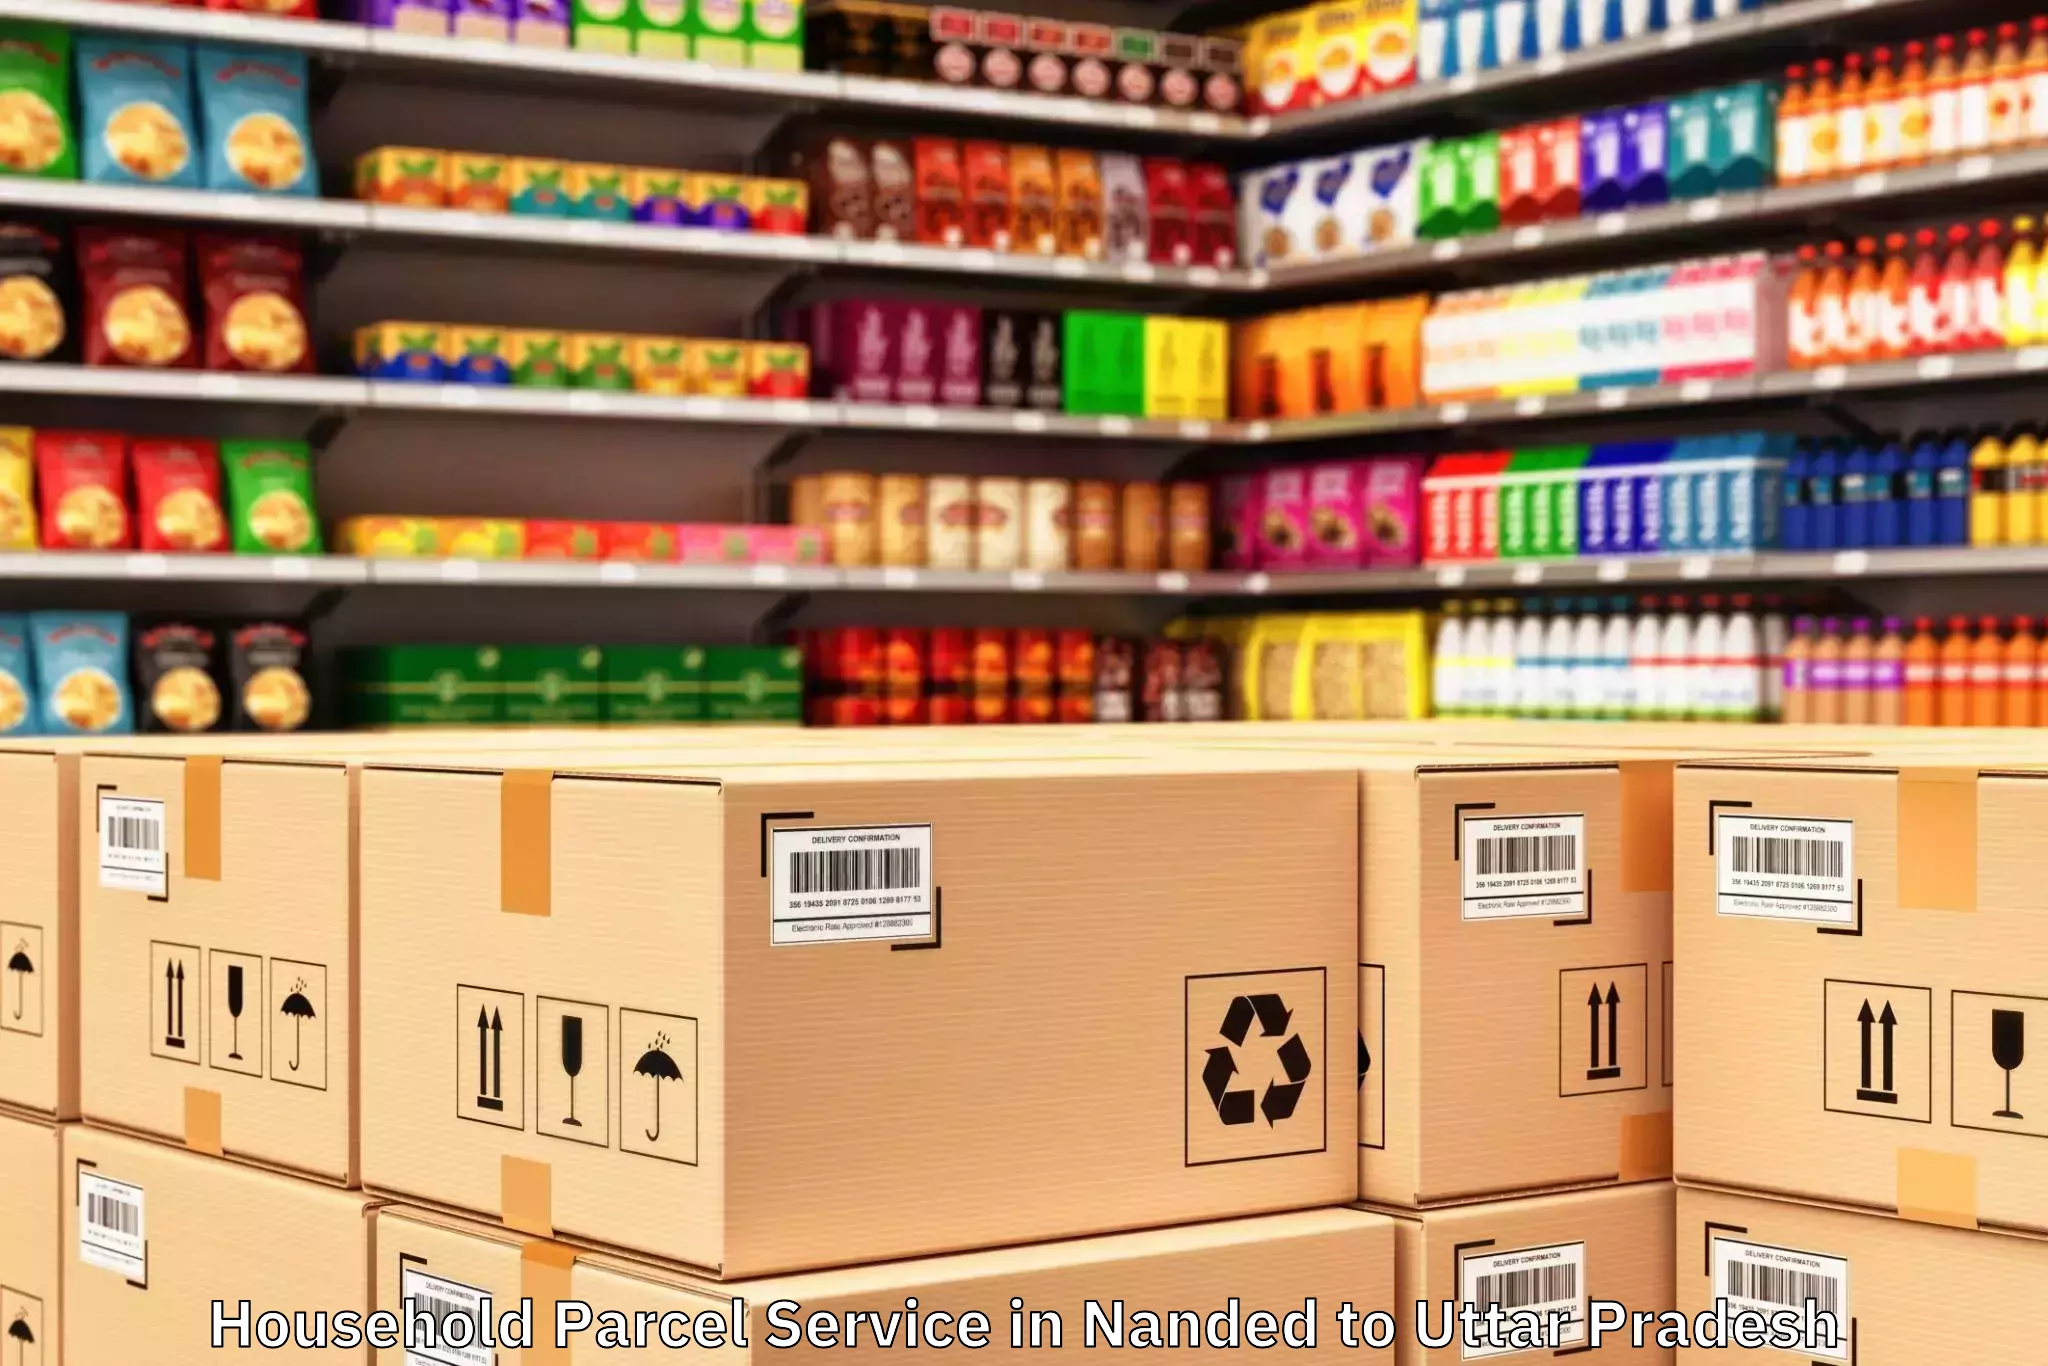 Top Nanded to Rama University Kanpur Household Parcel Service Available